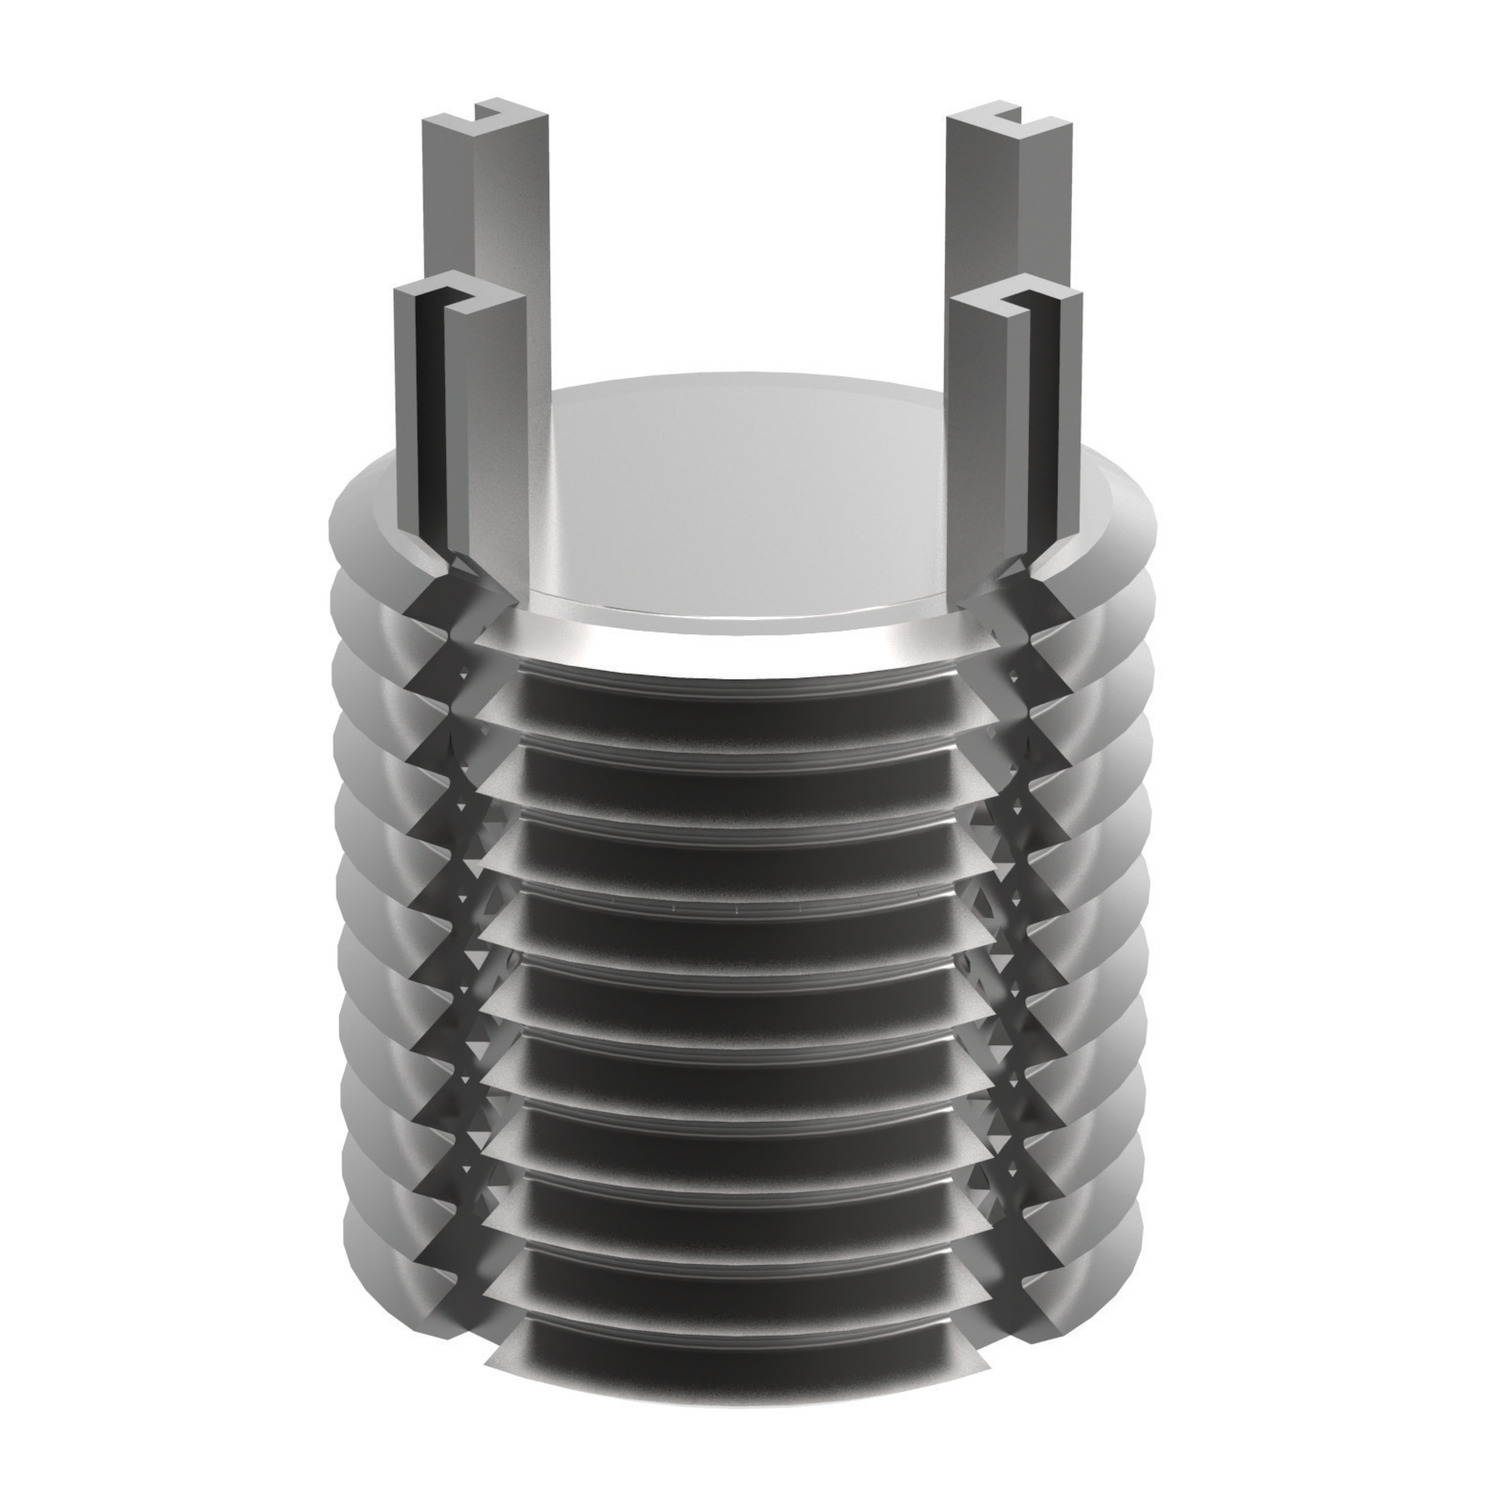 Threaded Insert - Solid - Metric Commercial grade solid thread inserts that allow any thread size to be drilled after installation. Available in stainless or pasivated steel.